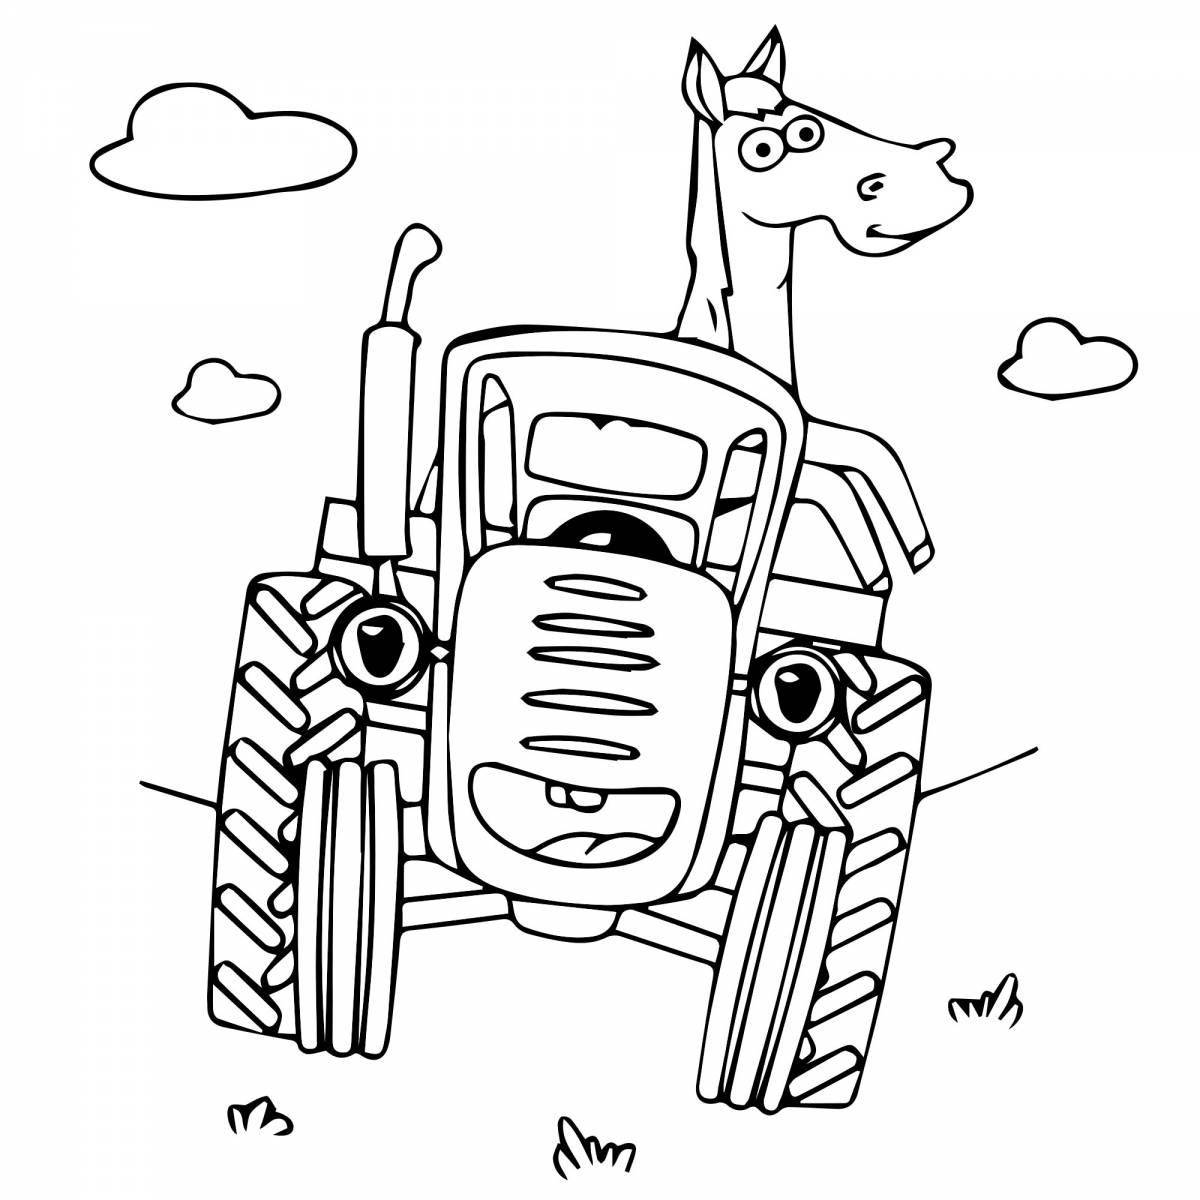 Zany blue tractor coloring page